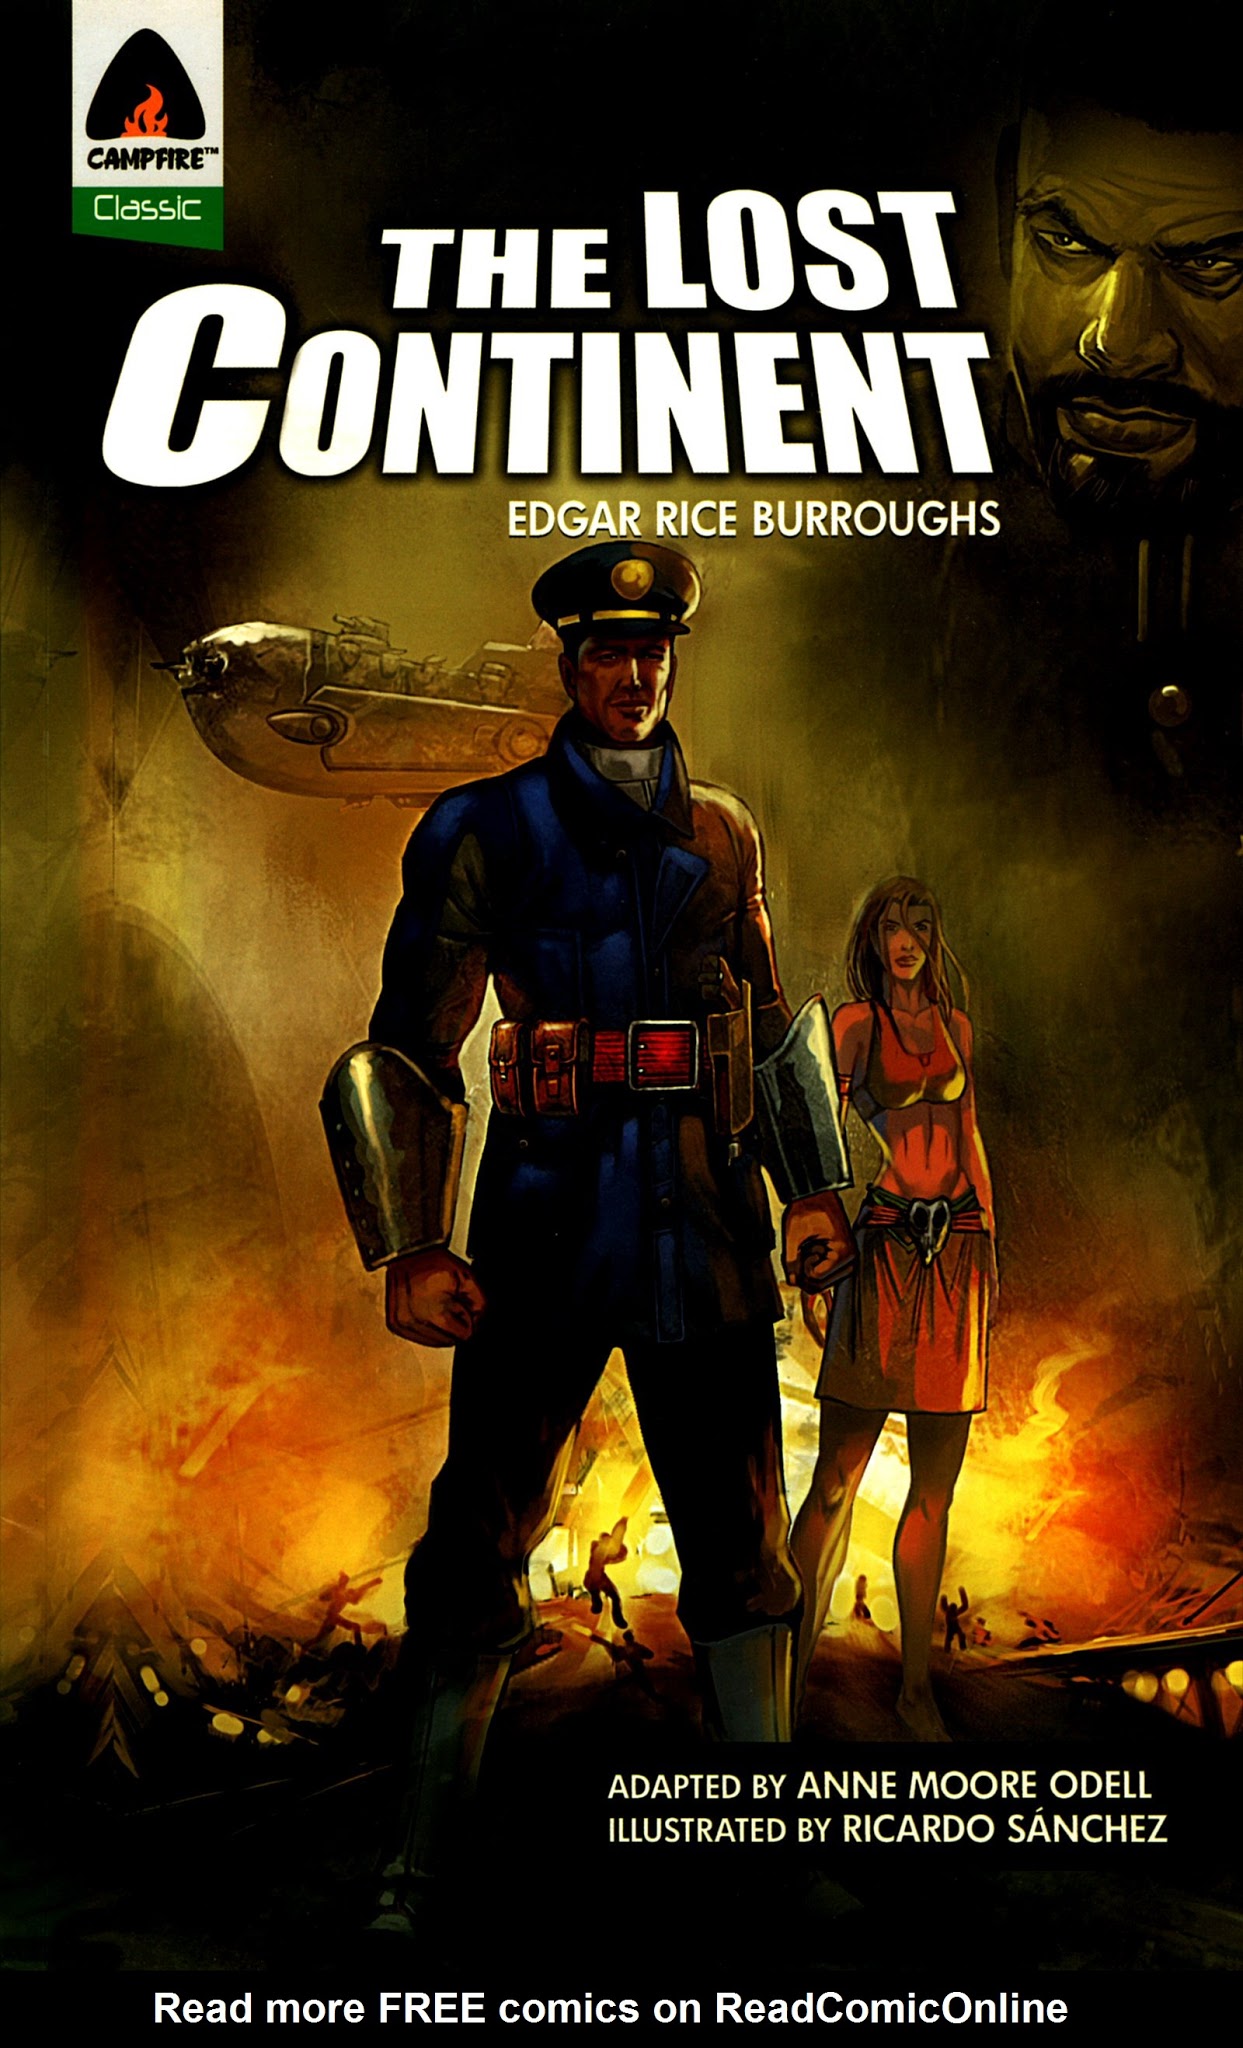 Read online The Lost Continent comic -  Issue # Full - 1